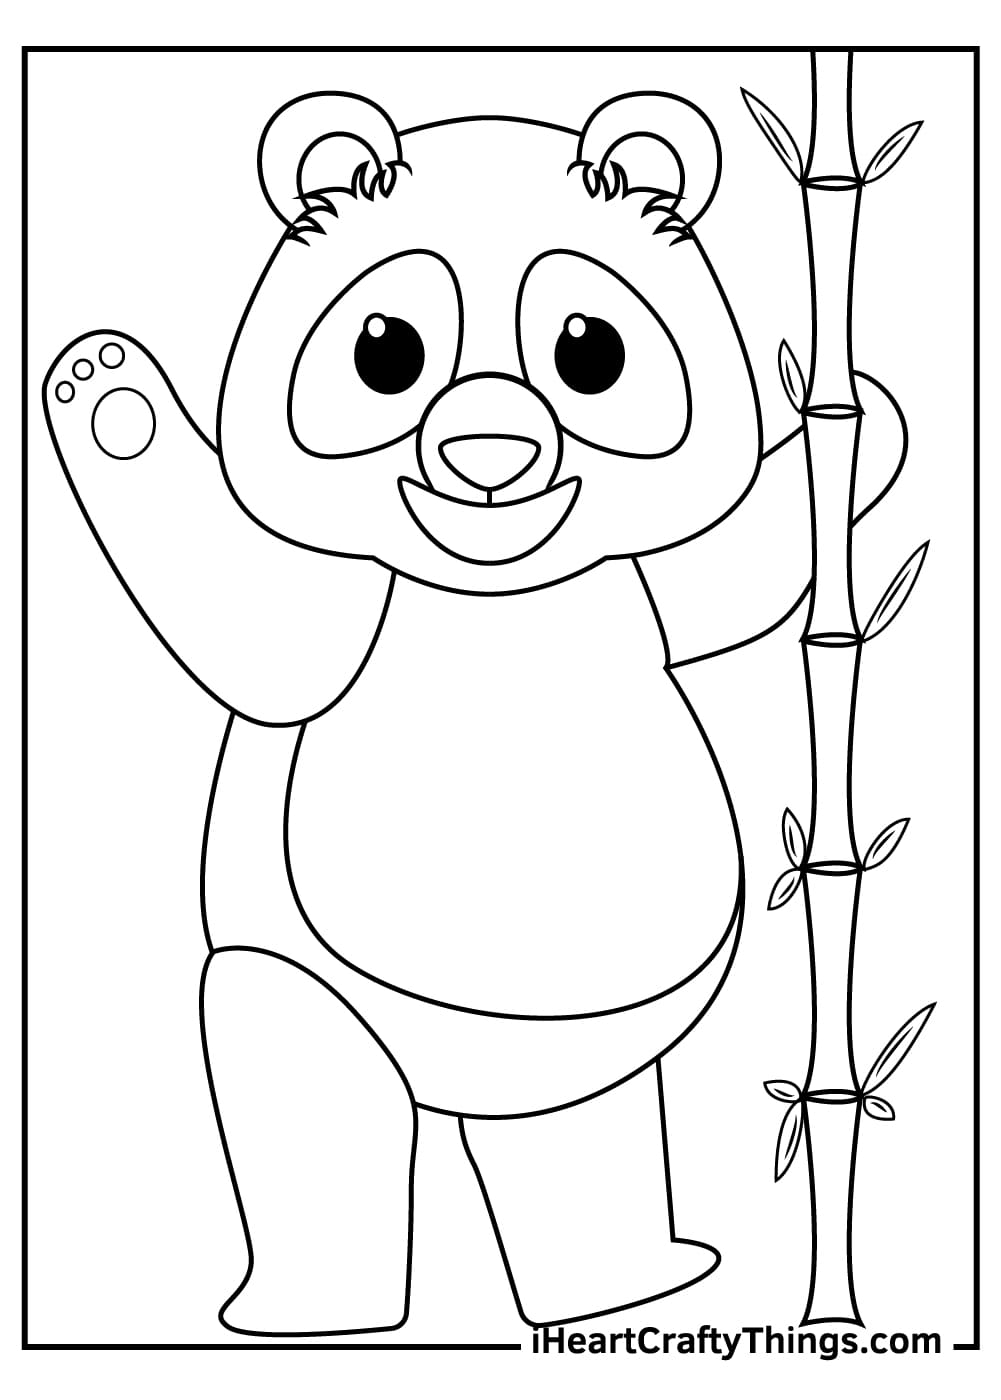 Giant Panda Lovely Coloring Page